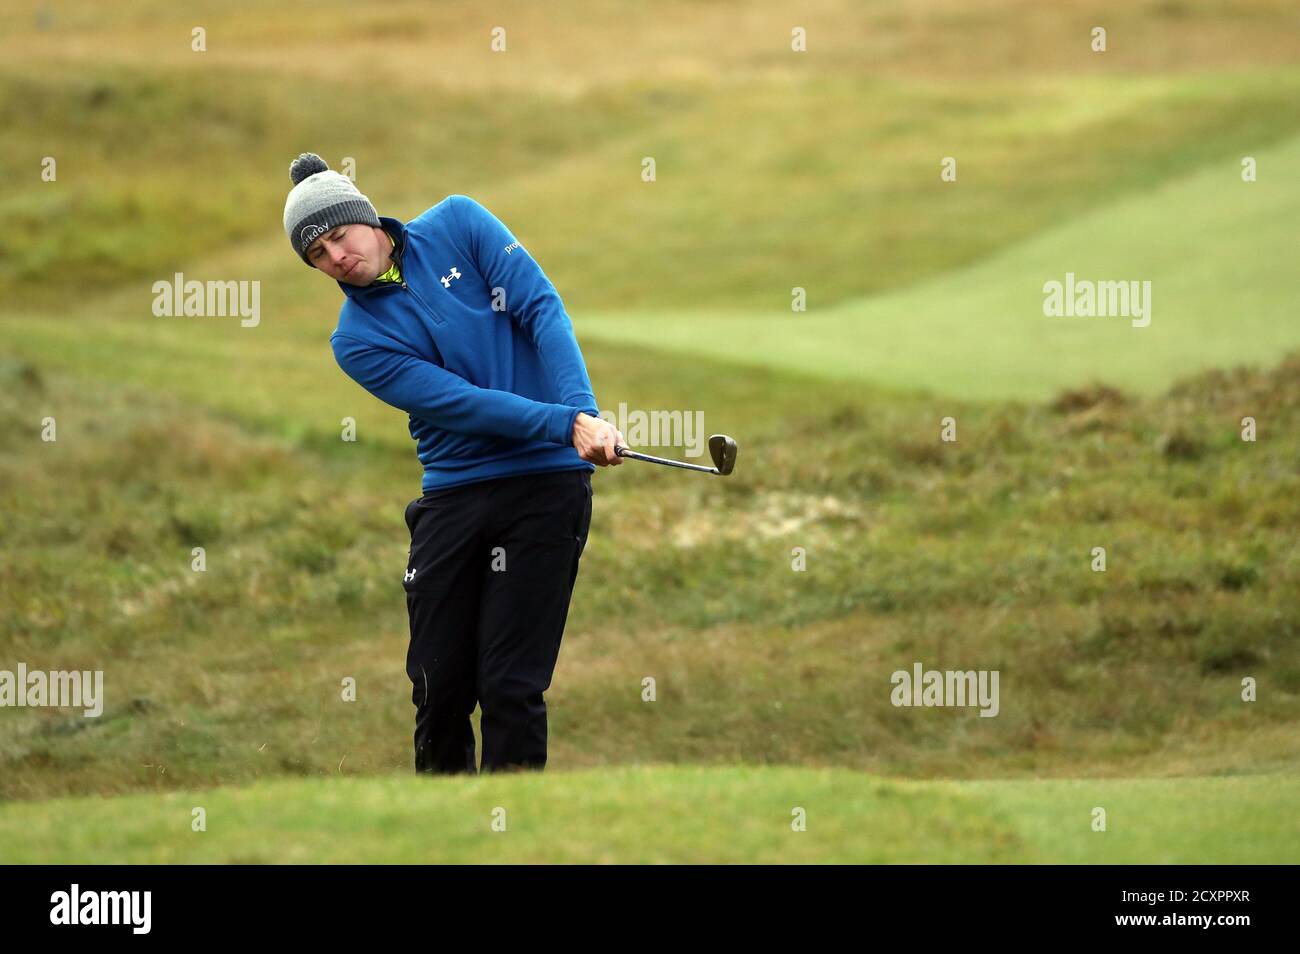 England's Matthew Fitzpatrick on the seventh during the first round of the Aberdeen Standard Investments Scottish Open at the The Renaissance Club, North Berwick. Stock Photo